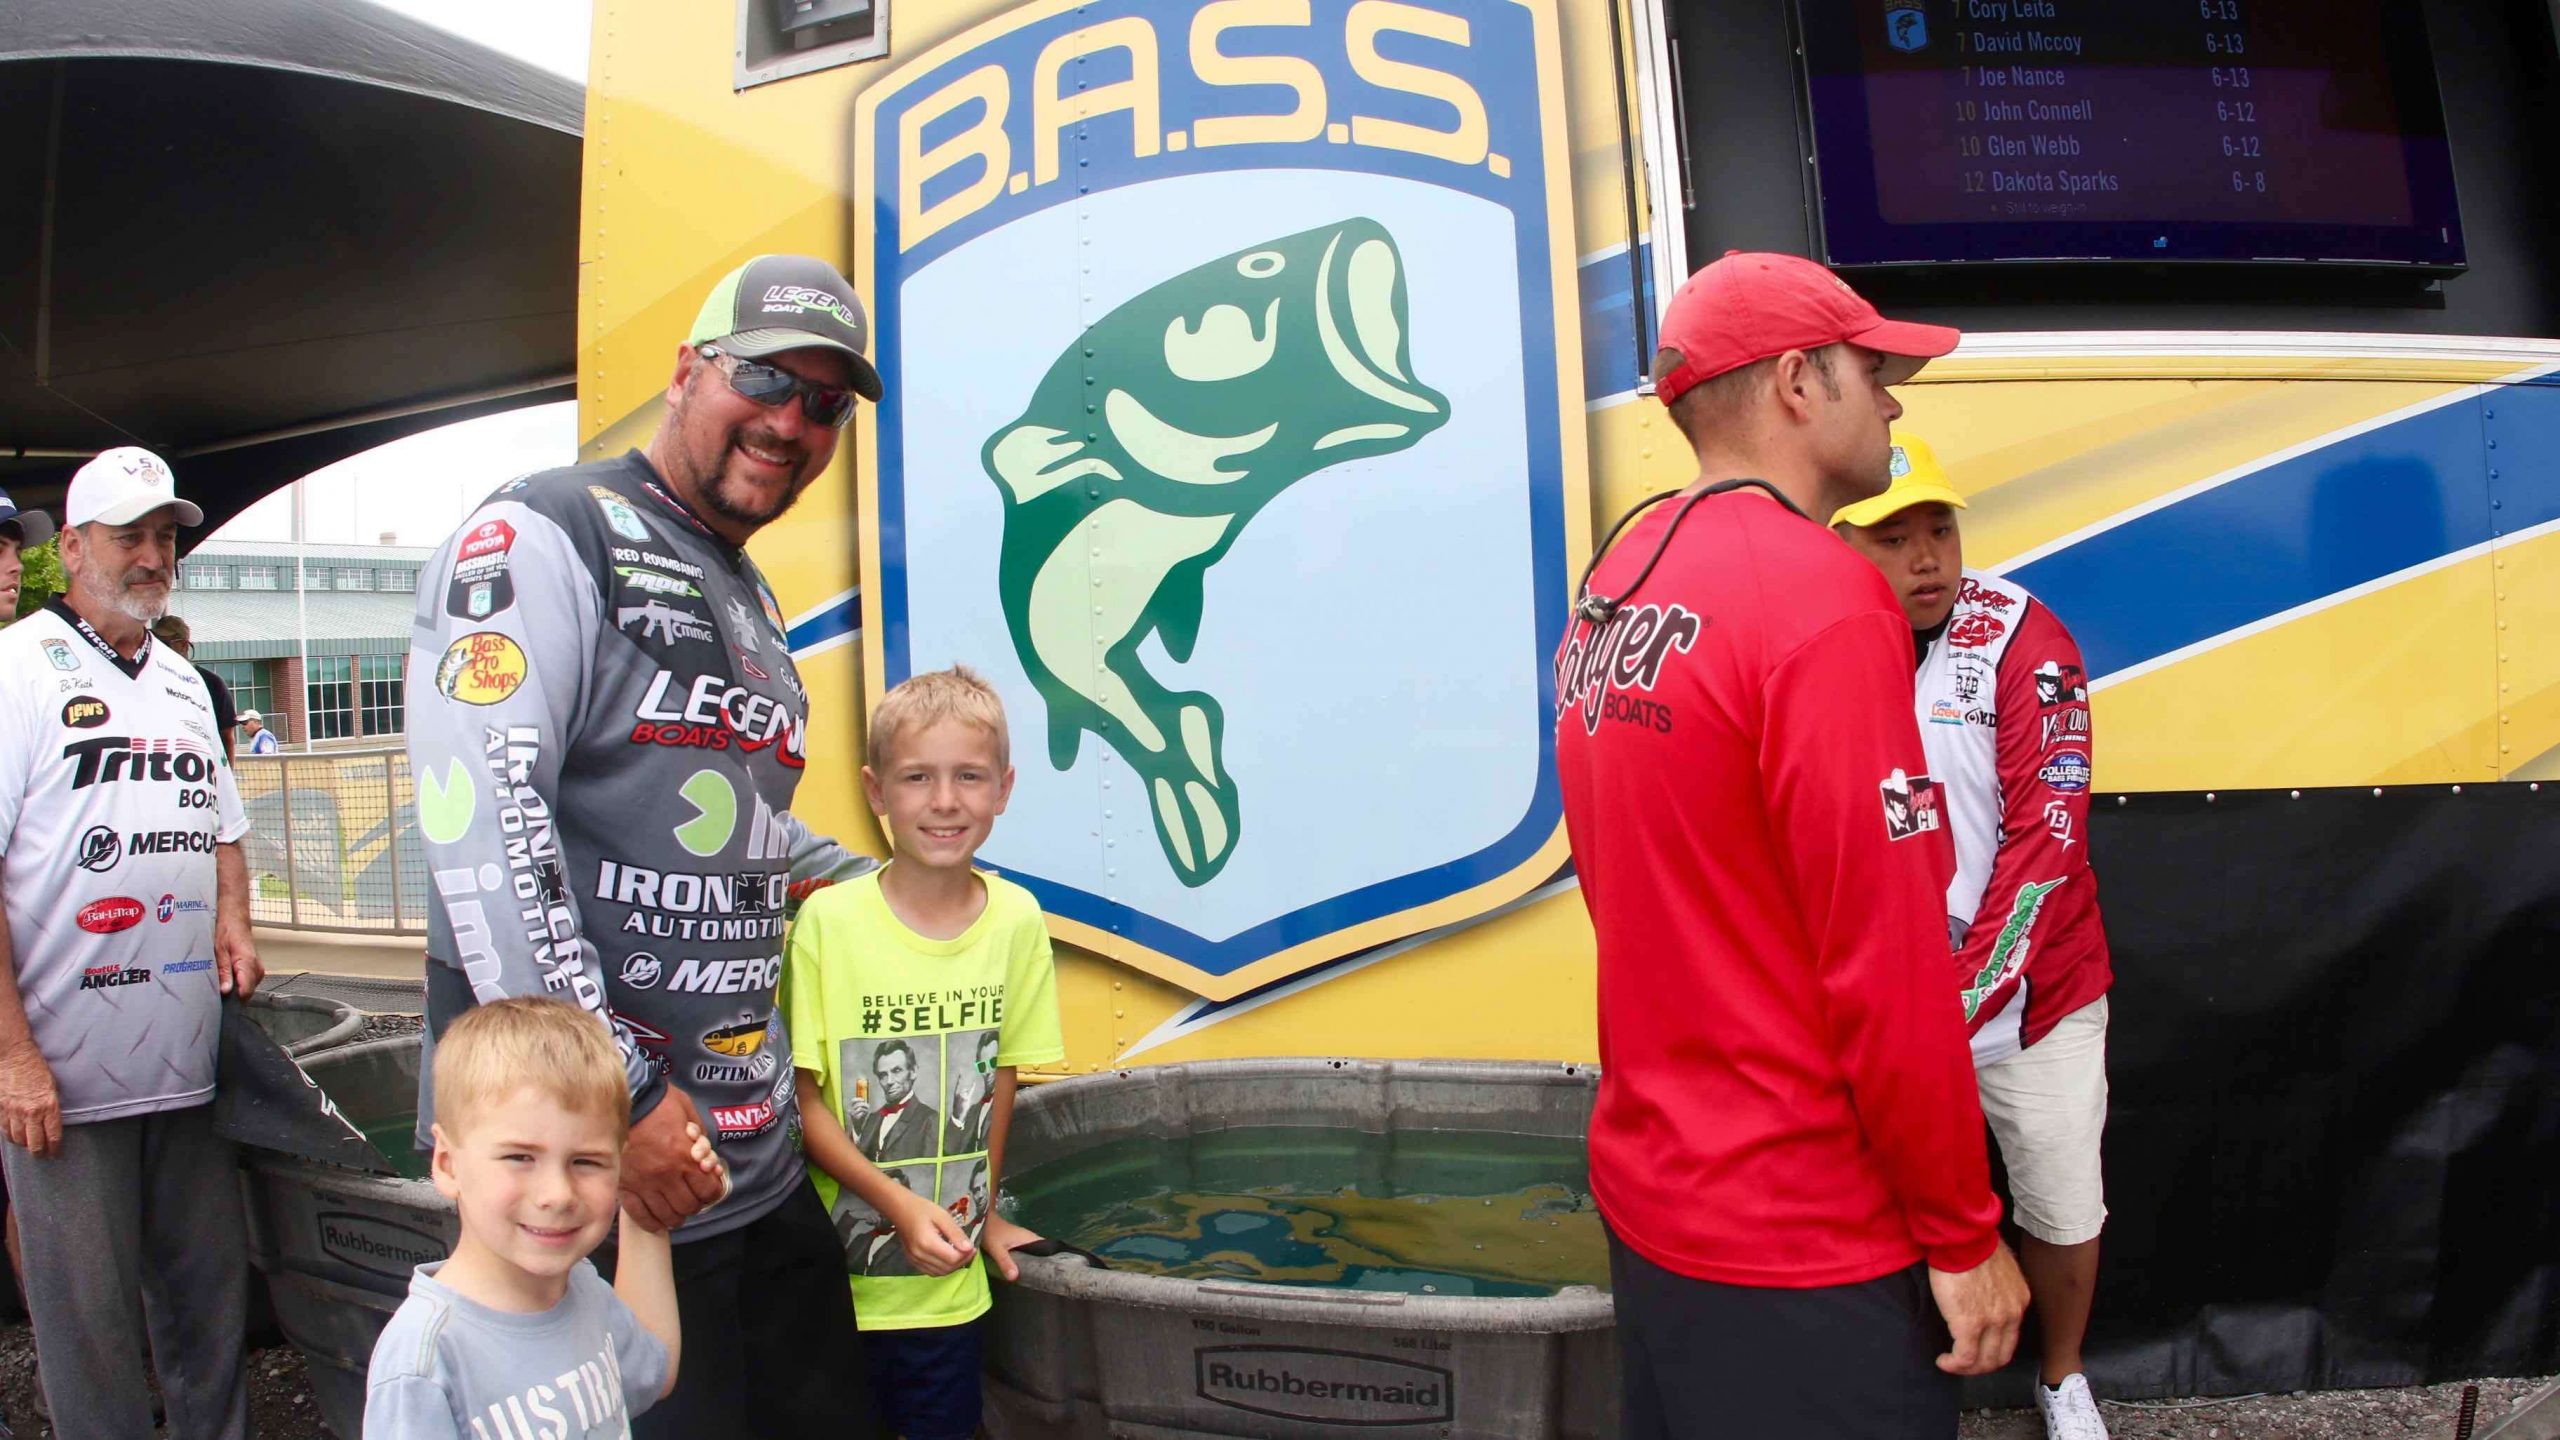 Fred Roumbanis of Bixby, Okla., went to the weigh-in stage with his sons, Jackson, 9, and Avery, 4 Â½. Roumbanis is 70th with 9-5.